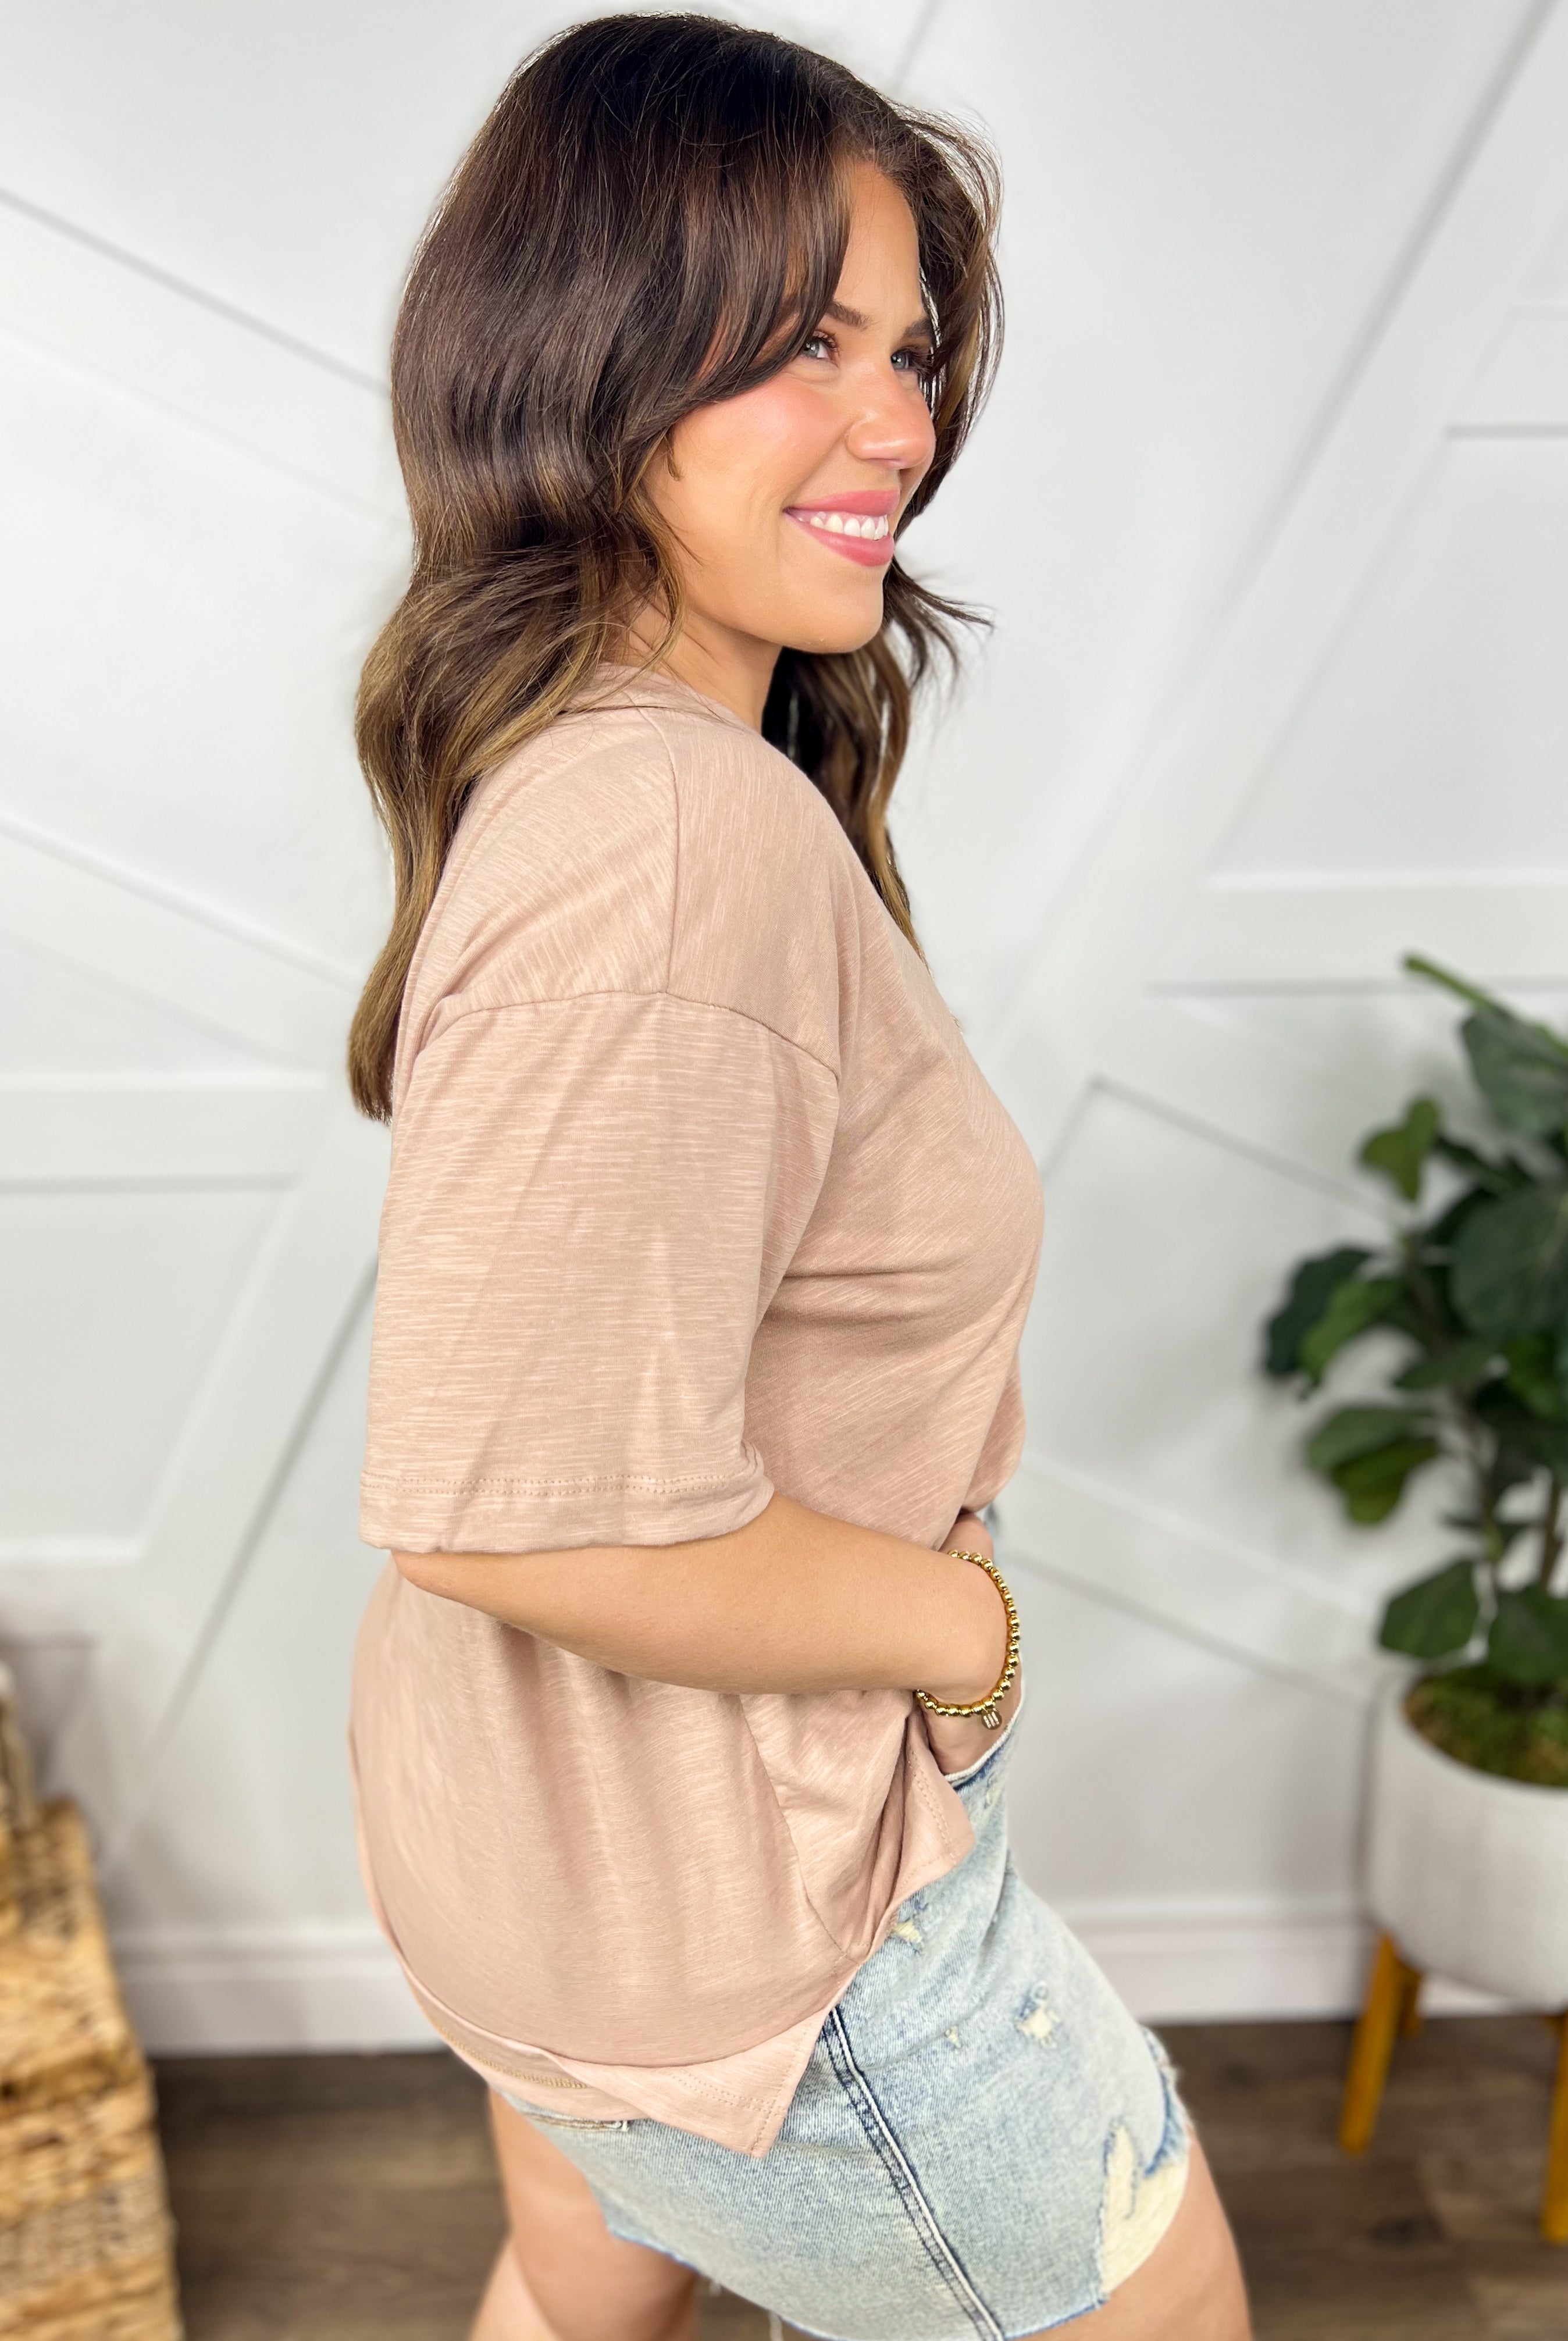 RESTOCK: Fan Favorite Top-110 Short Sleeve Top-STYLIVE-Heathered Boho Boutique, Women's Fashion and Accessories in Palmetto, FL